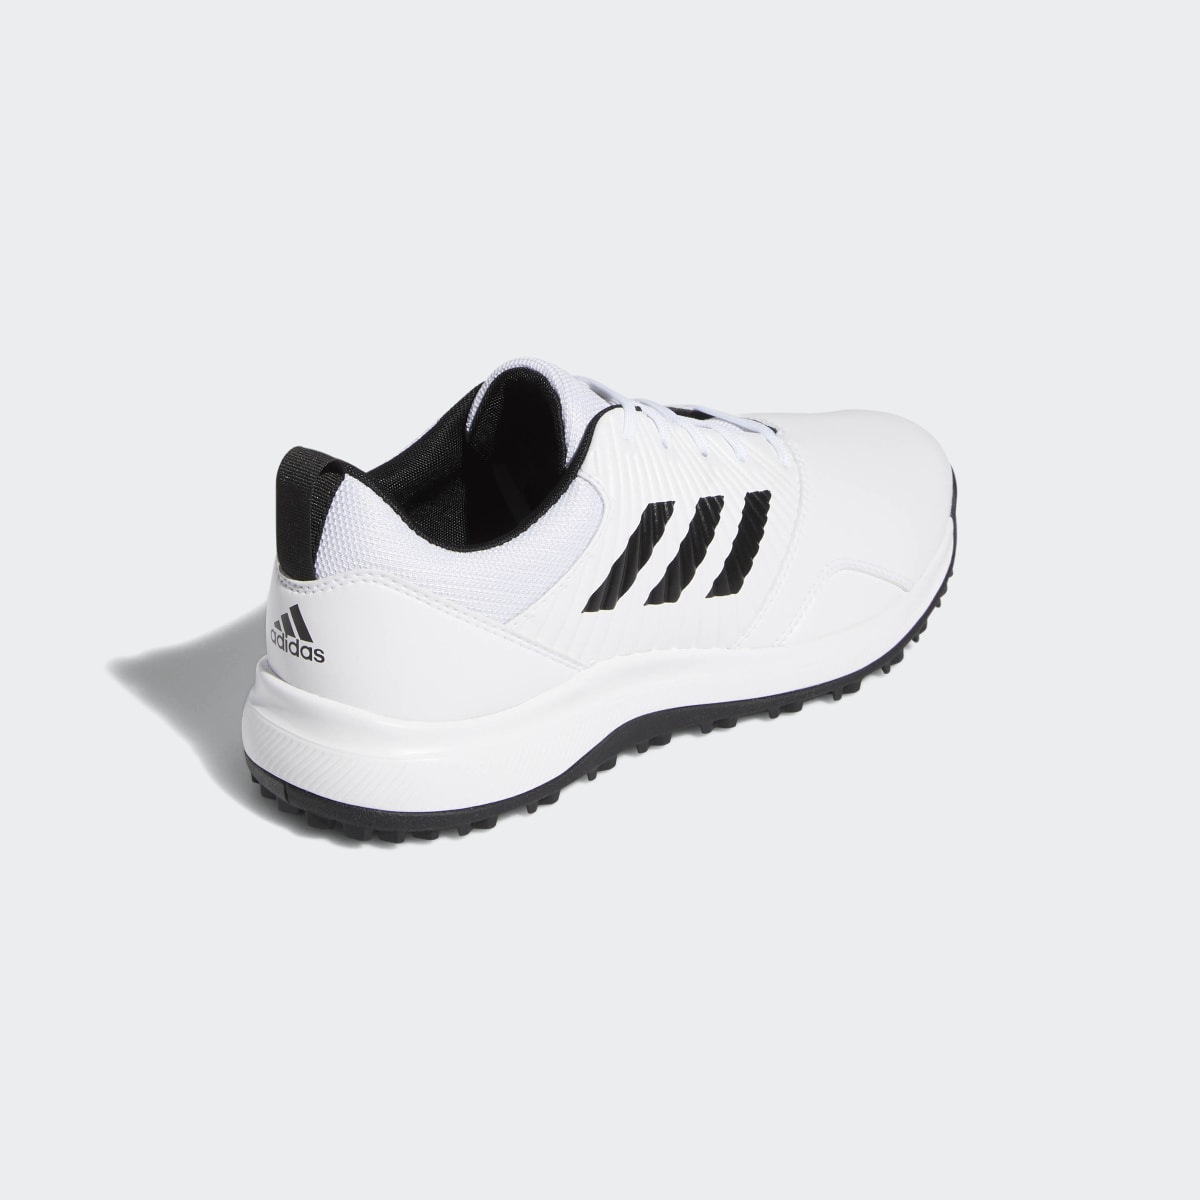 Adidas CP Traxion Spikeless Shoes. 7